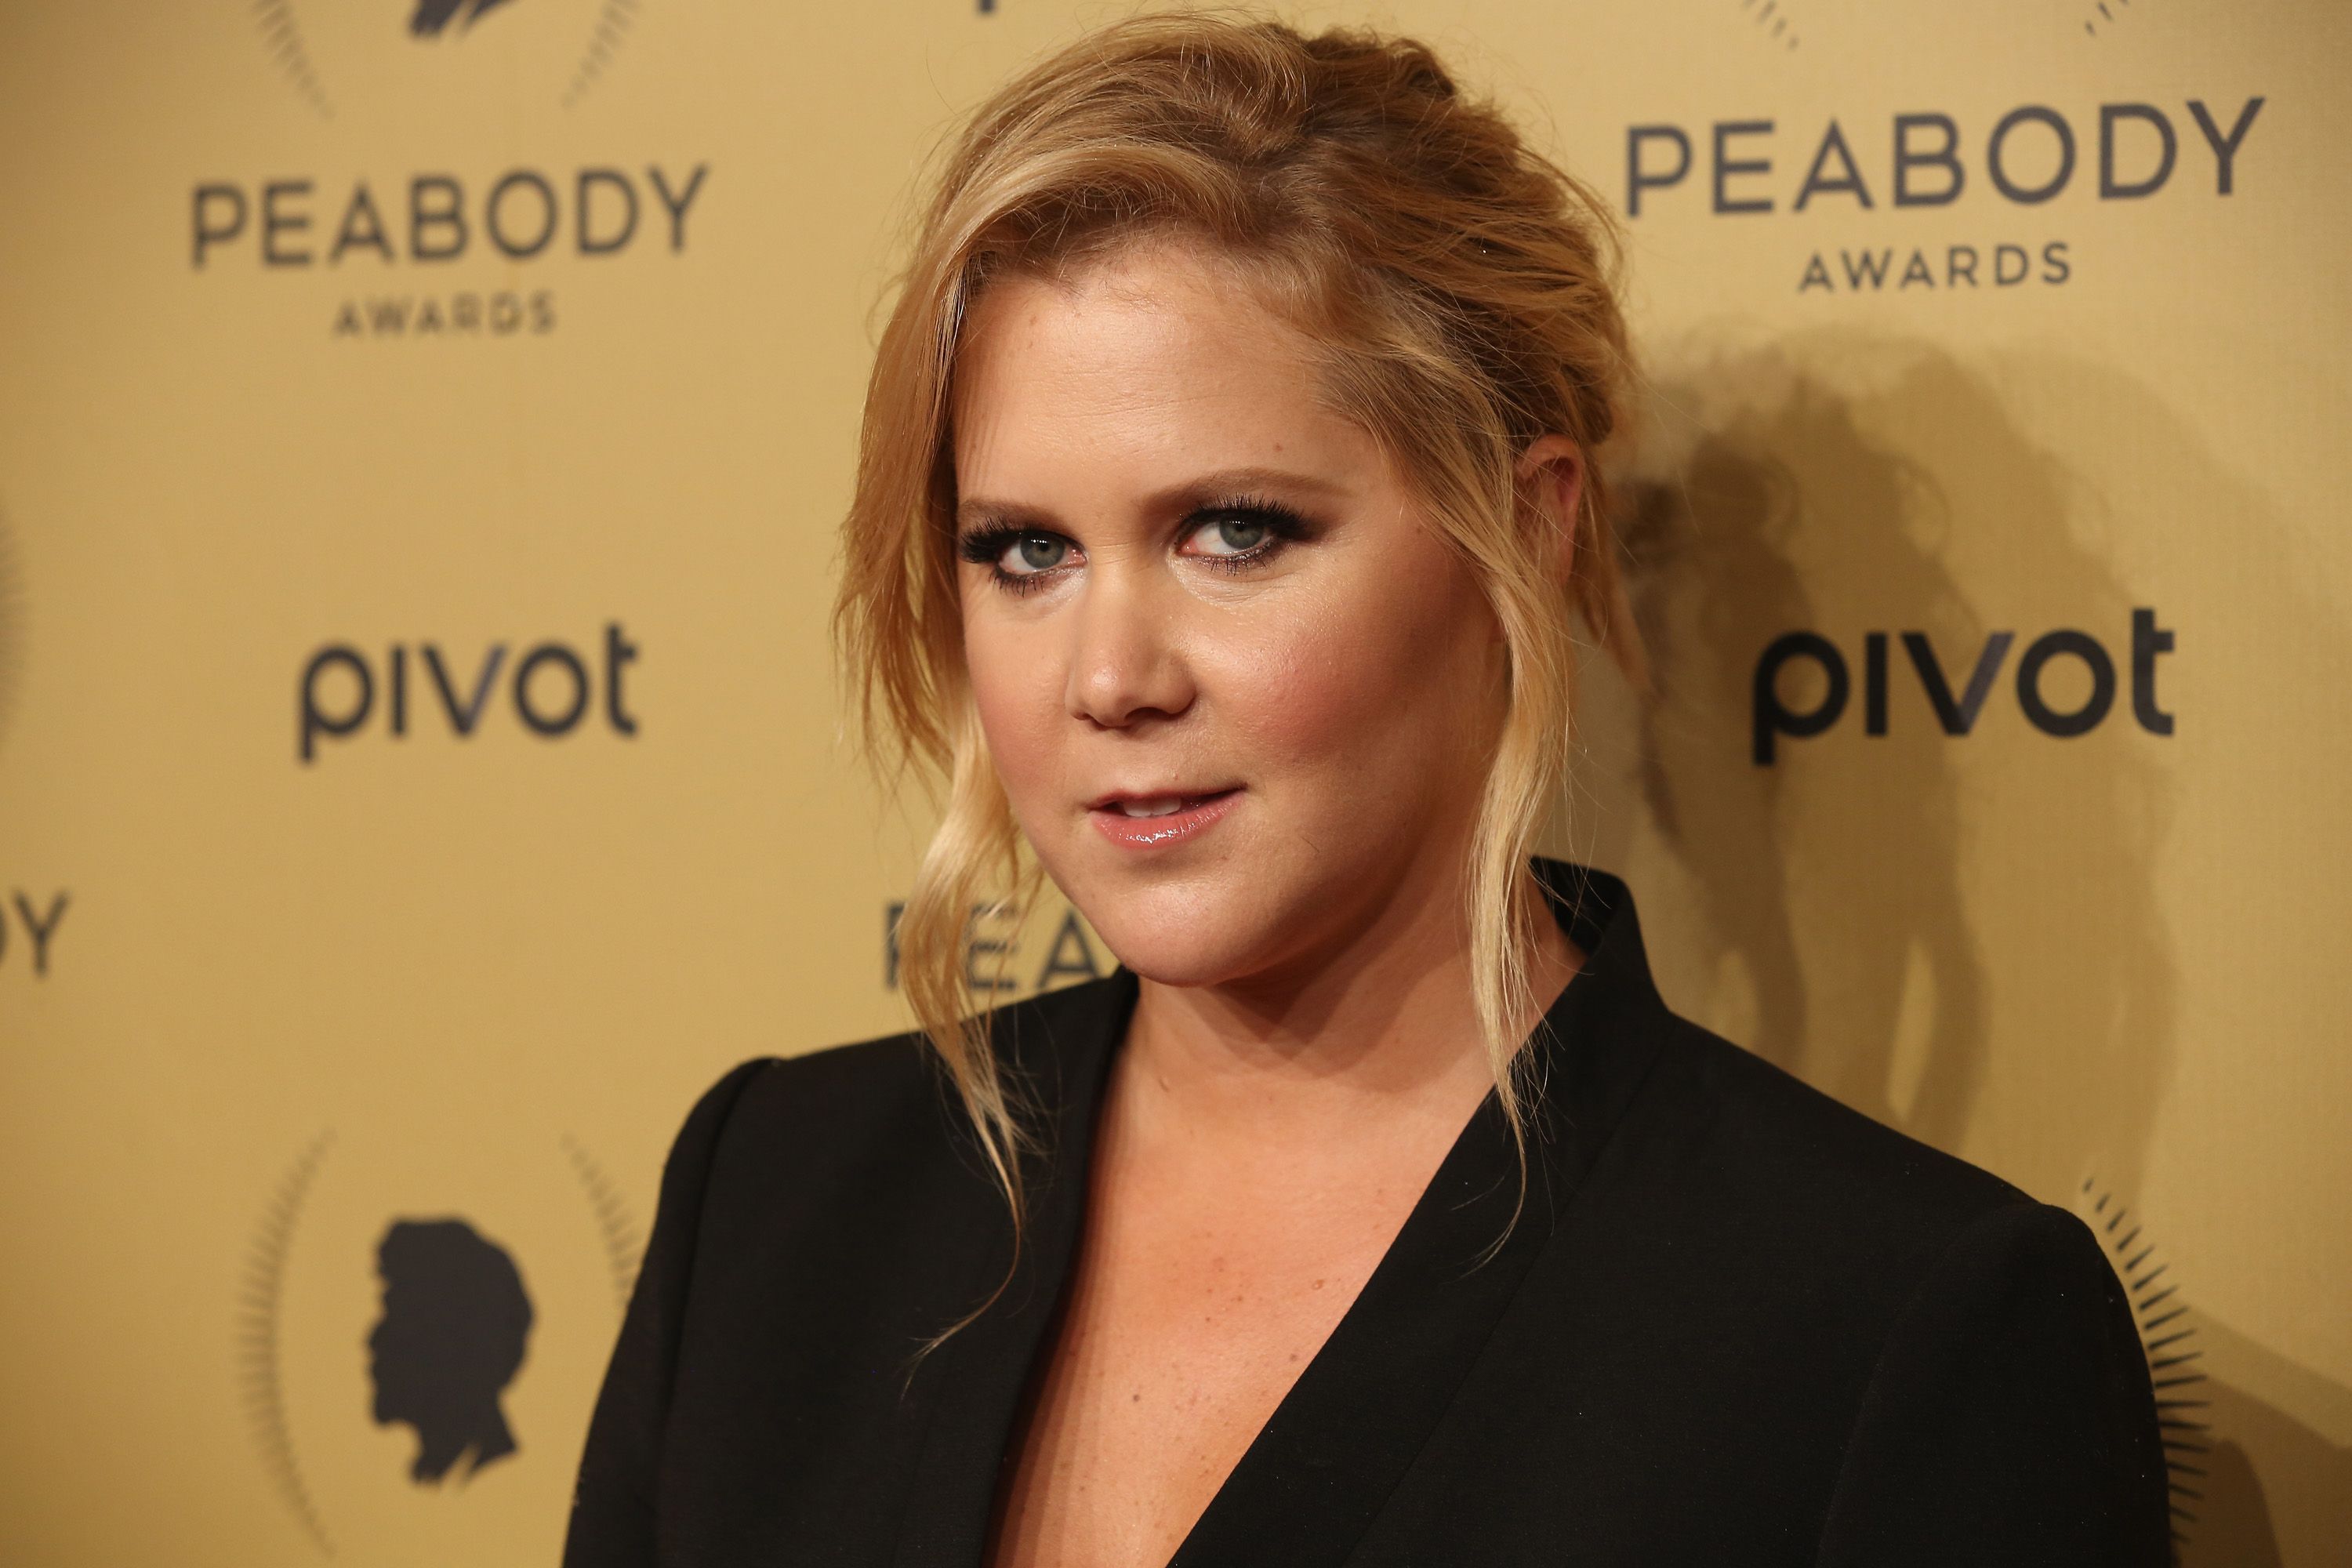 Amy Schumer at the 74th Annual Peabody Awards Ceremony at Cipriani Wall Street on May 31, 2015, in New York City | Photo: Jemal Countess/Getty Images